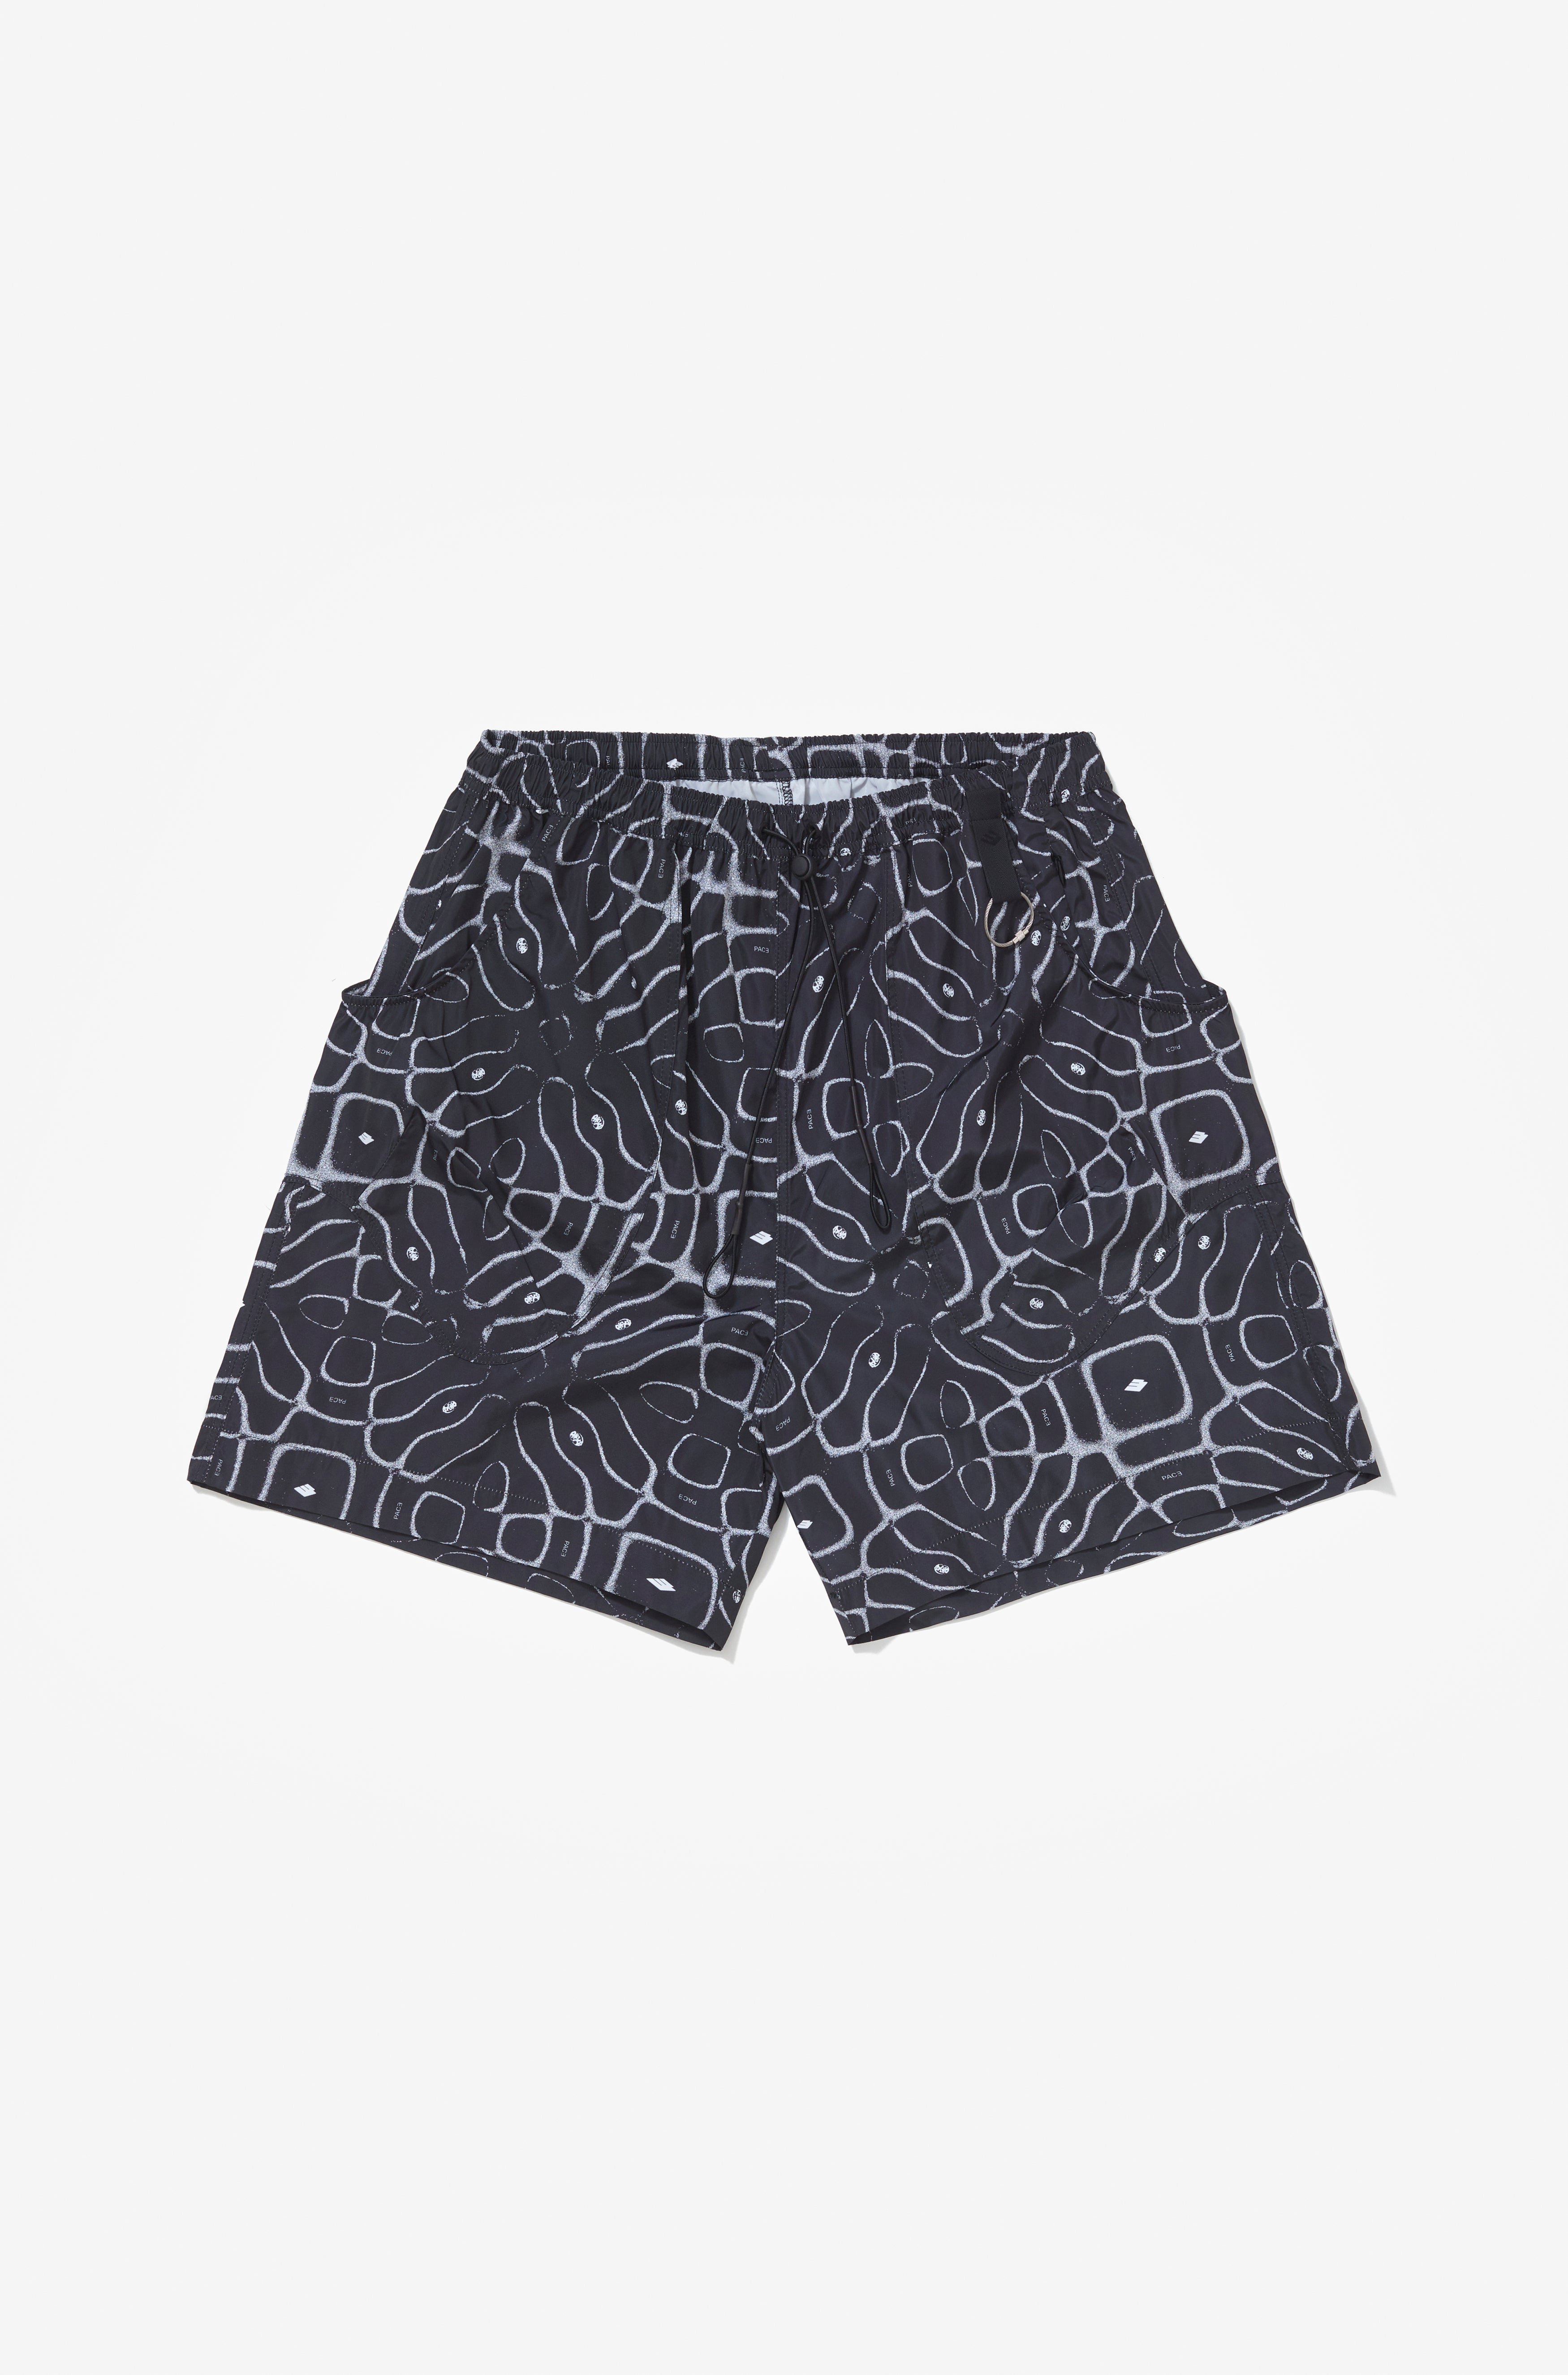 Shorts Pace Figures Tatical Chladni Black